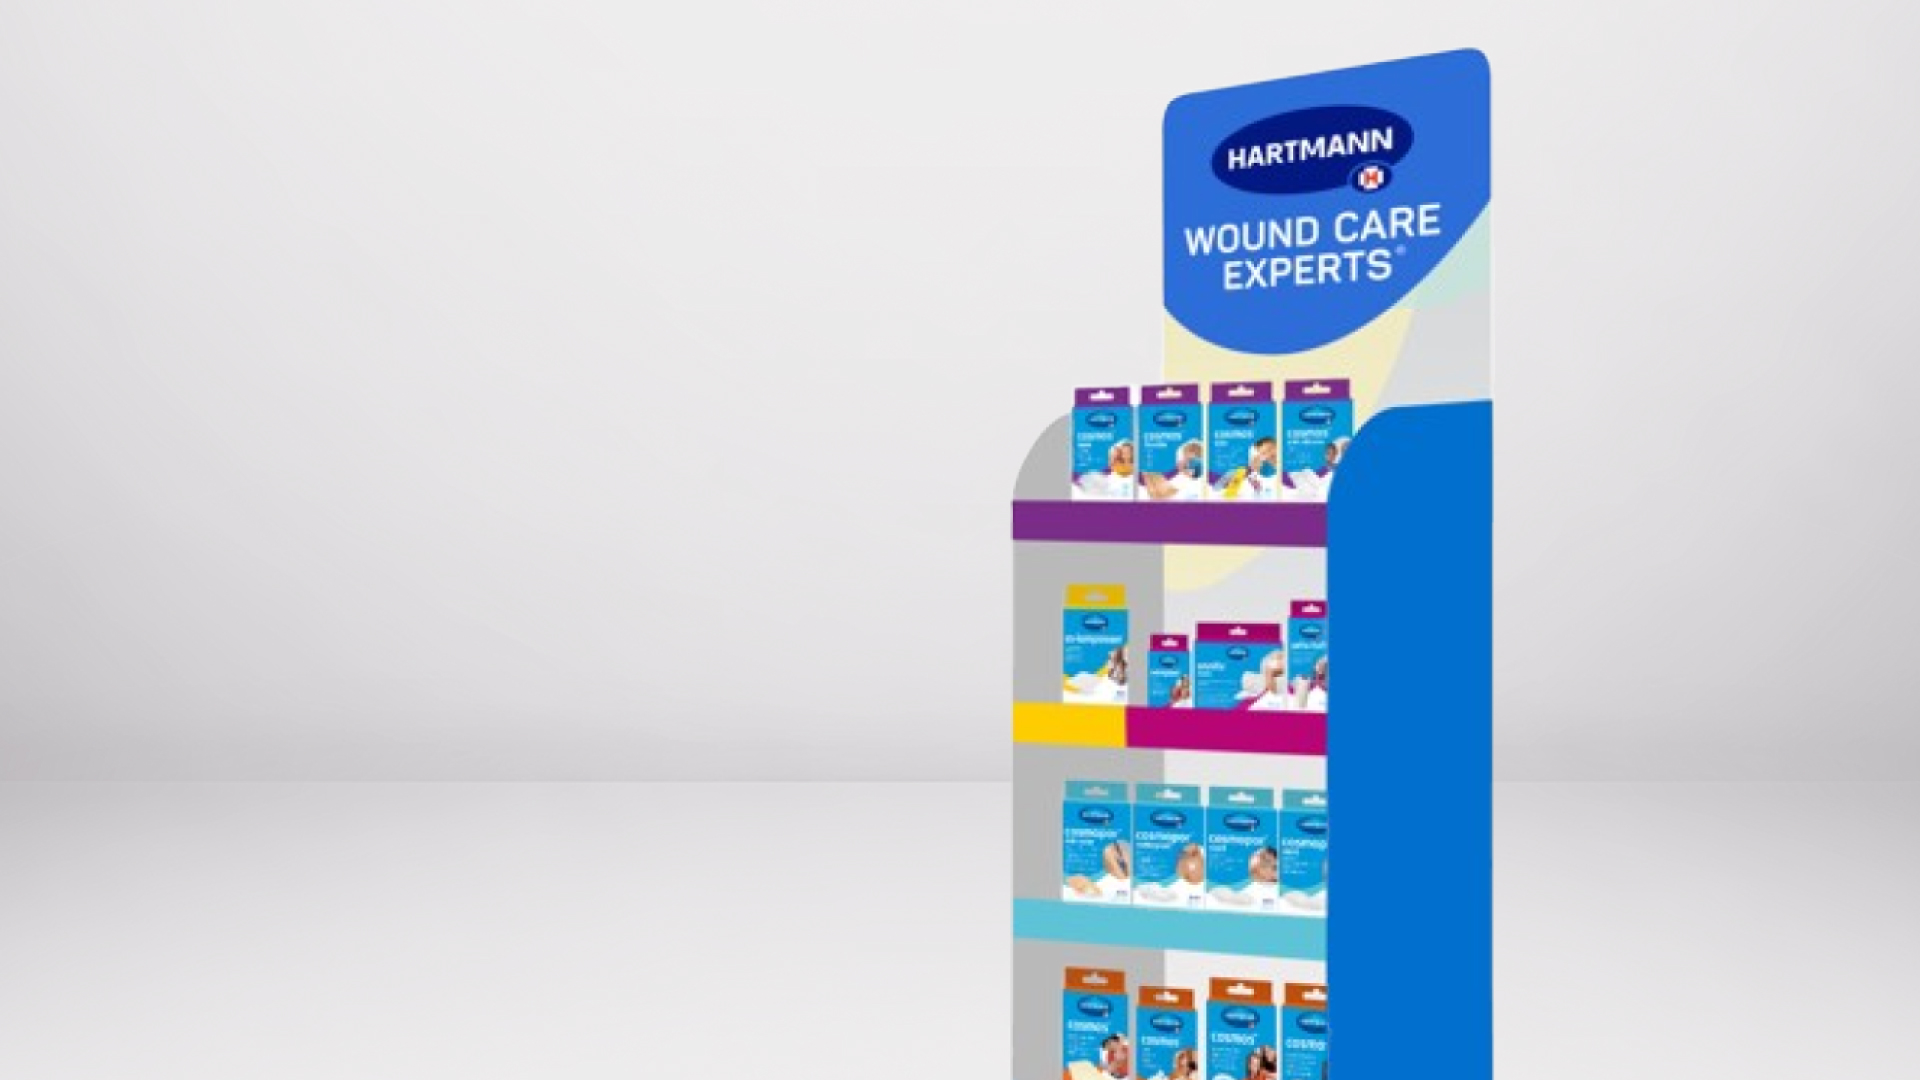 A display stand for the pharmacy that showcases various HARTMANN products for wound care.